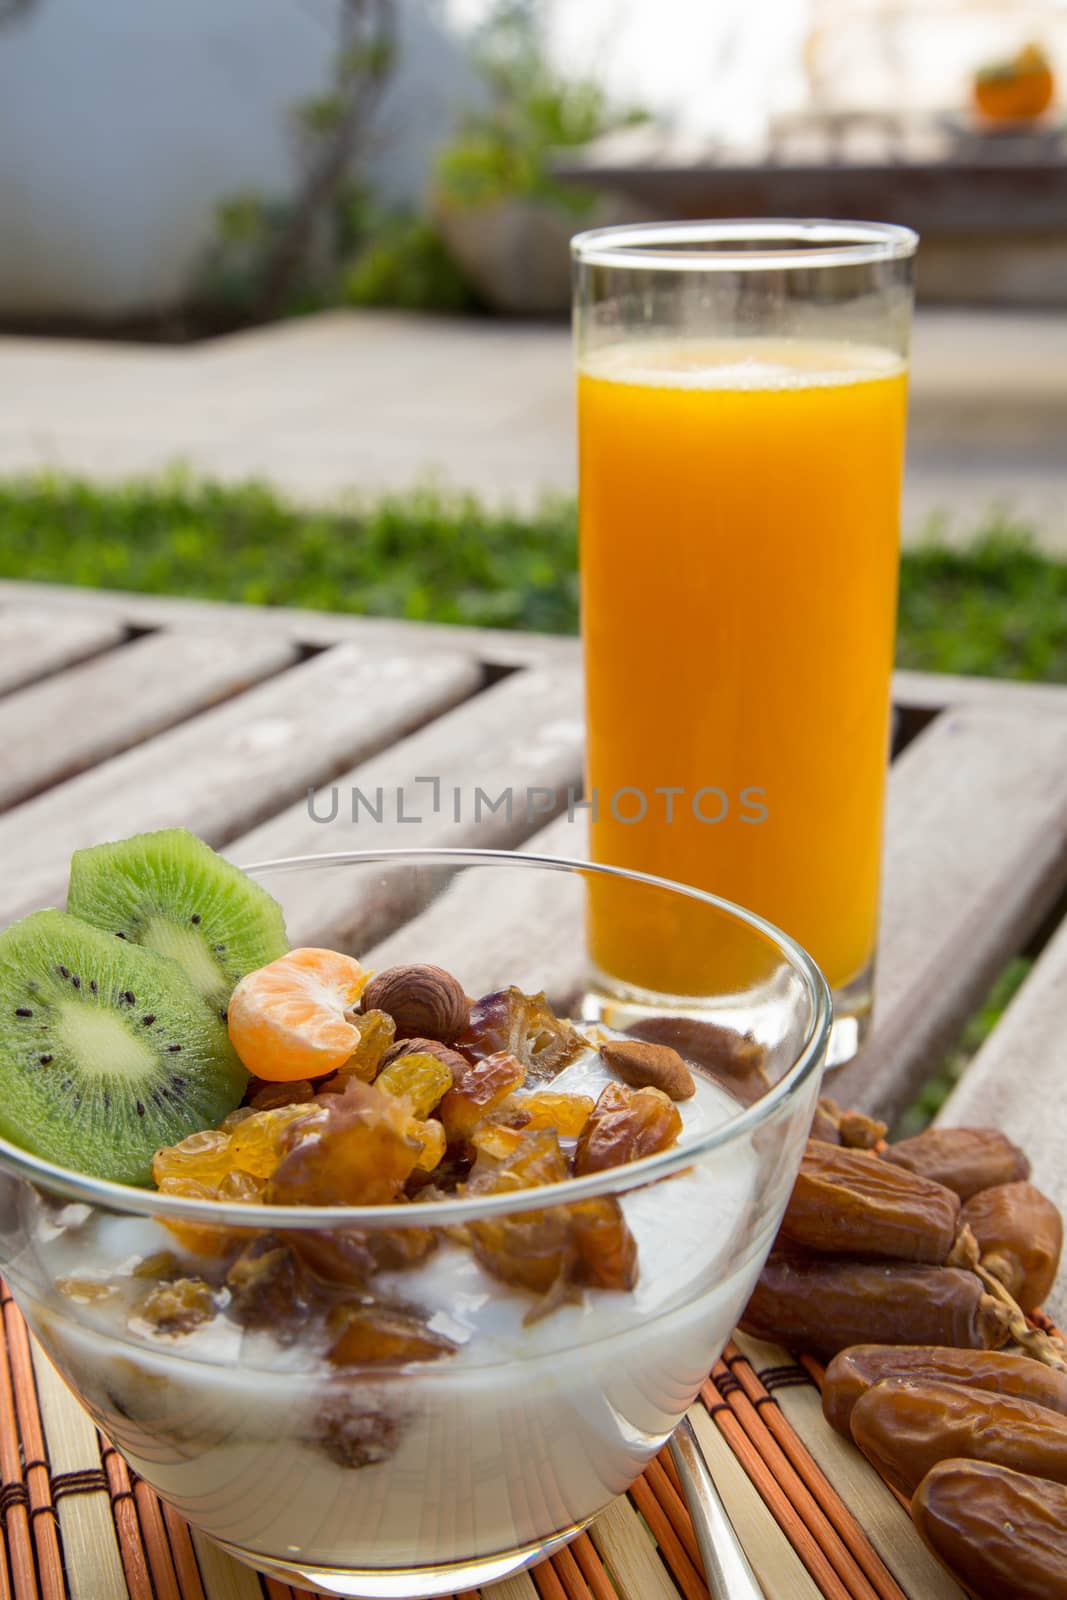 Healthy breakfast - natural yogurt with dried fruits and a glass of orange juice